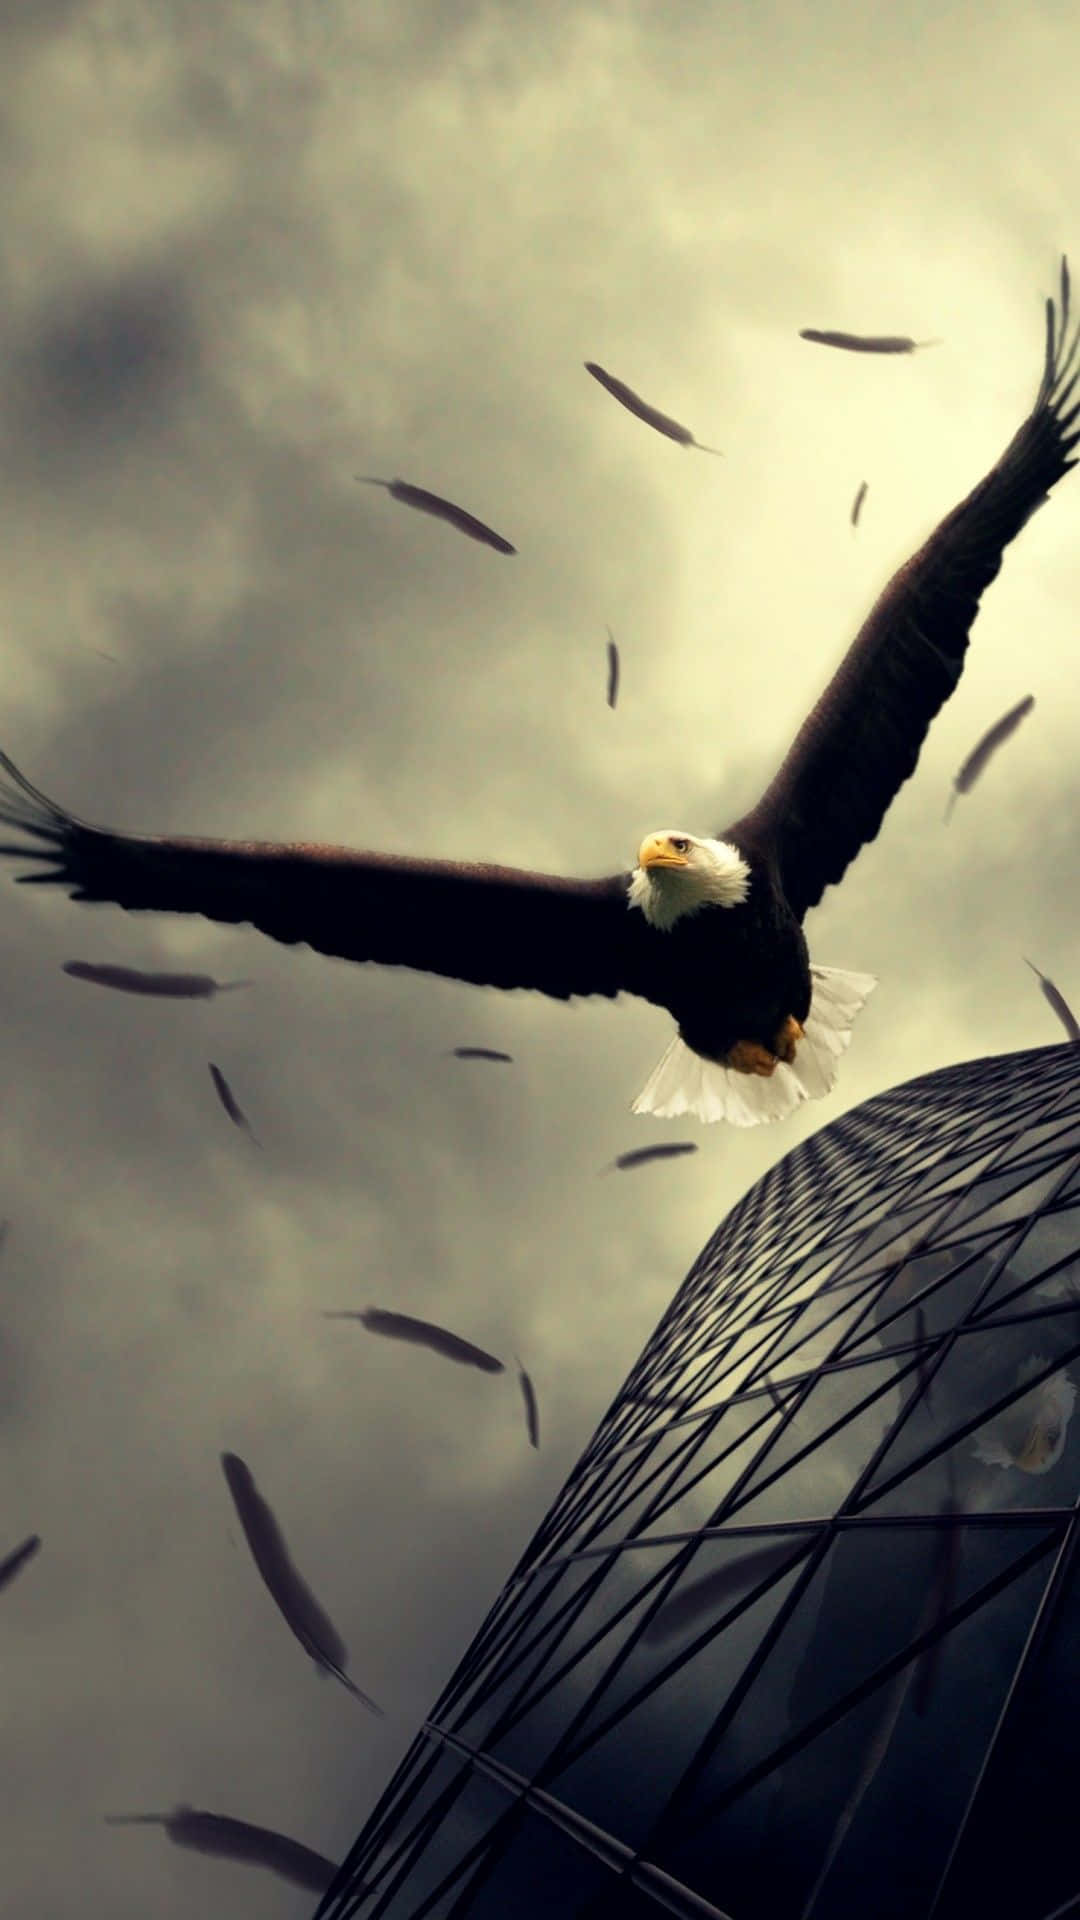 An Eagle Spreads Its Wings Across an IPhone's Screen Wallpaper